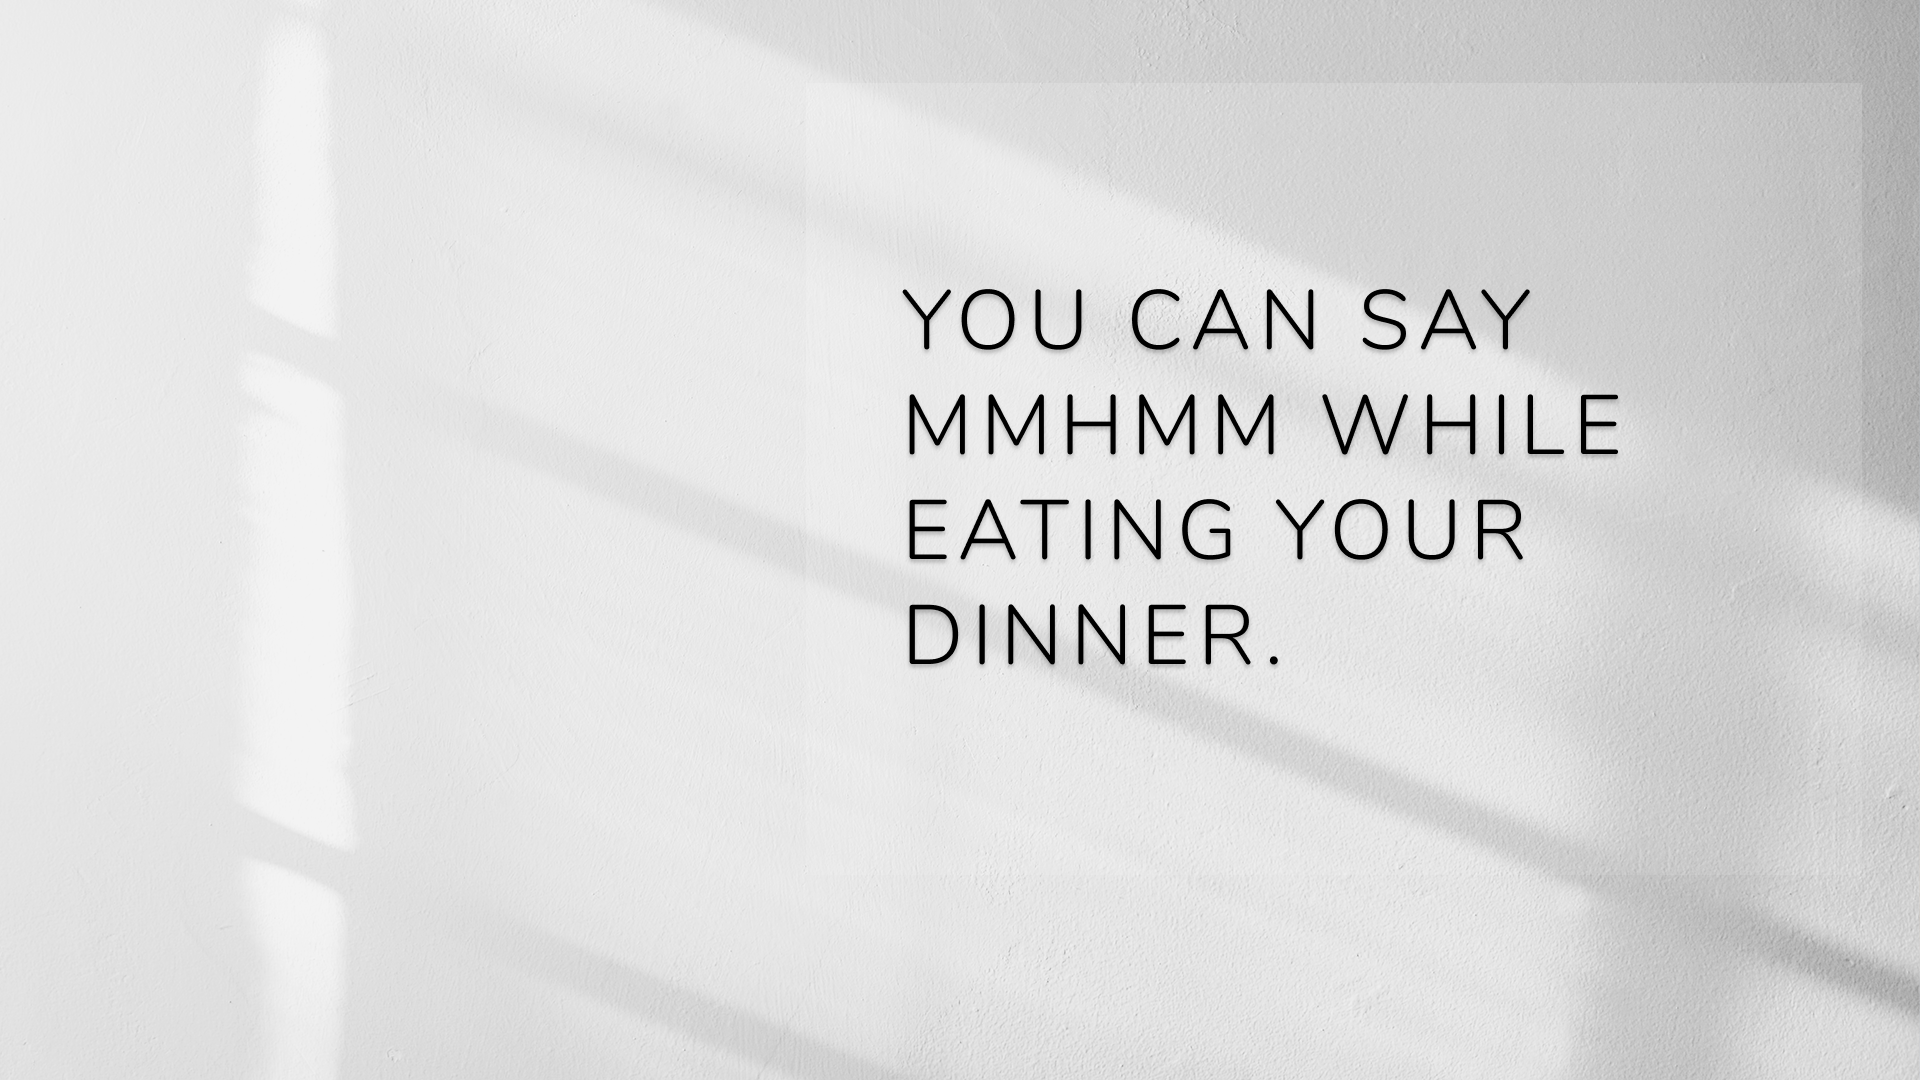 White wall with sunshine reflecting on wall, slide that says "You can say mmhmm while eating your dinner."